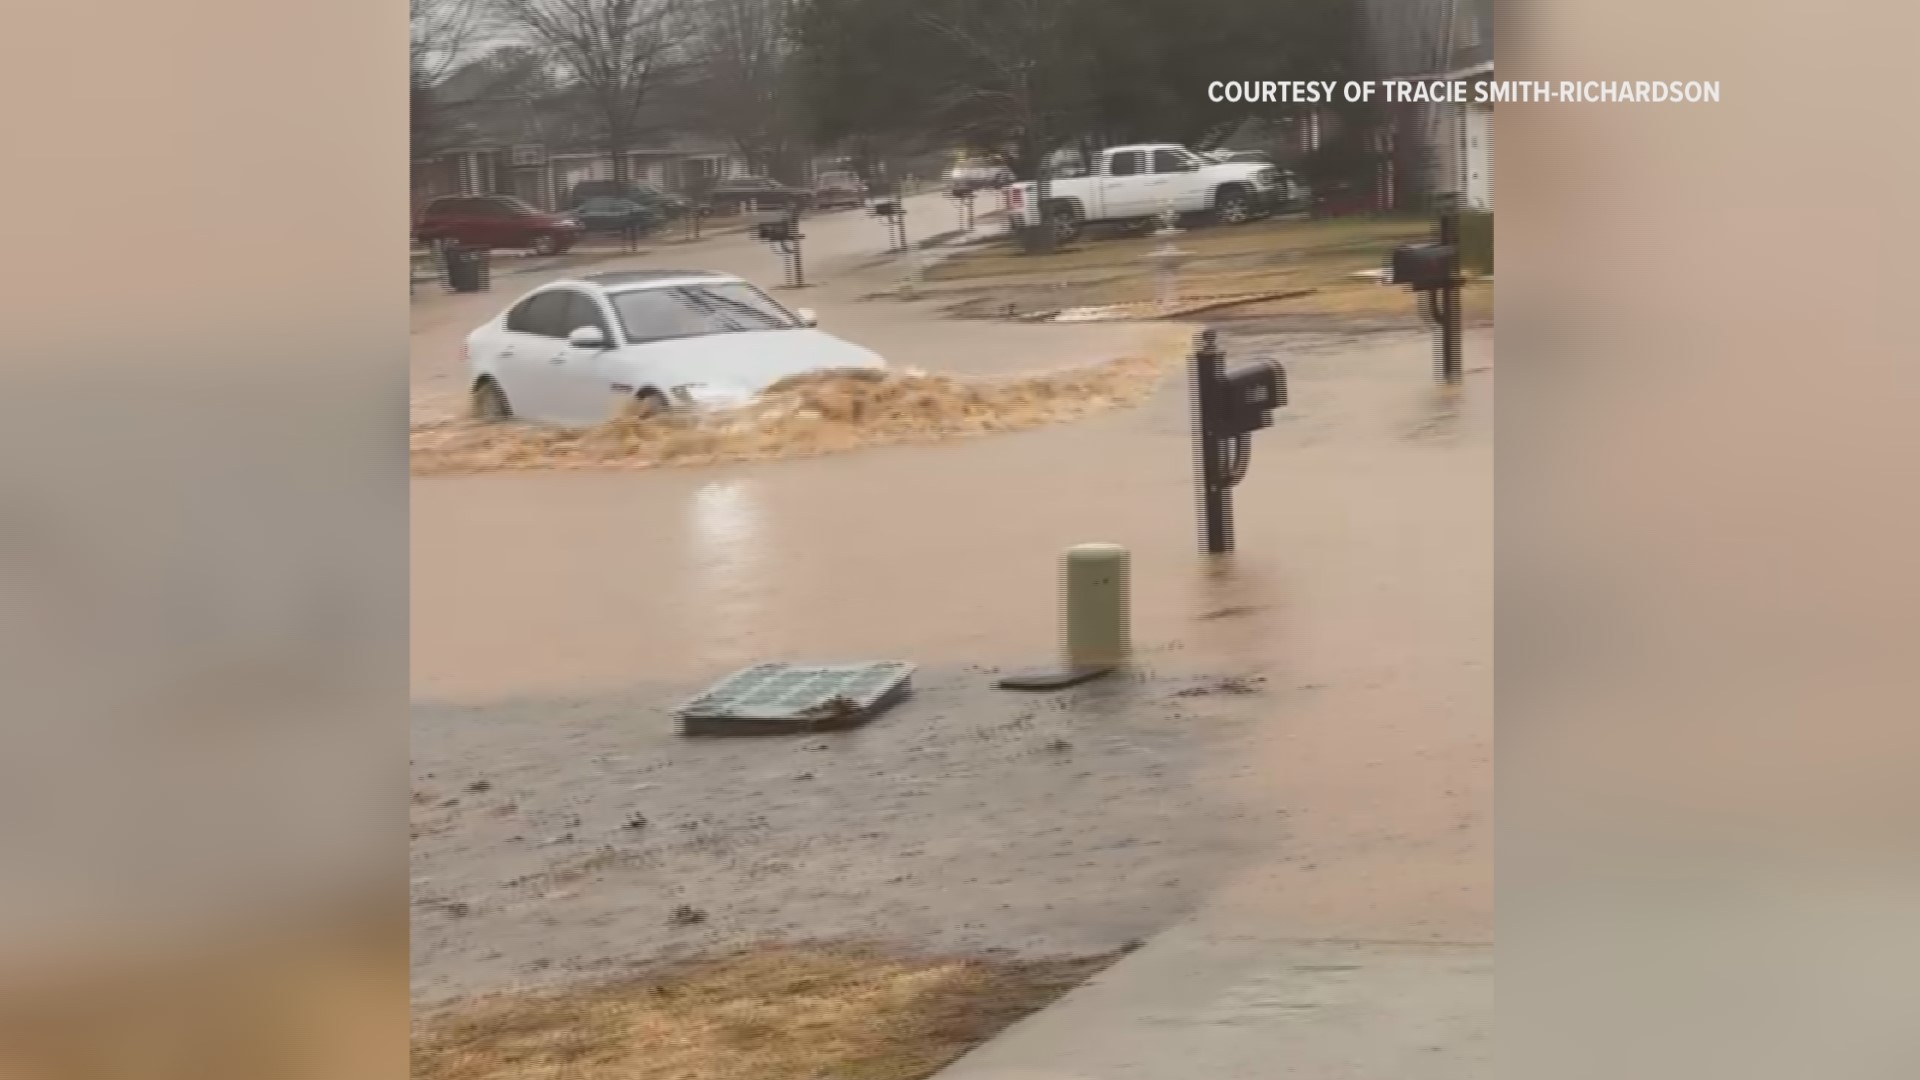 Several folks in the Manchester Place subdivision say they've been fighting flood problems for years. It comes after severe rains bring new attention to issues.